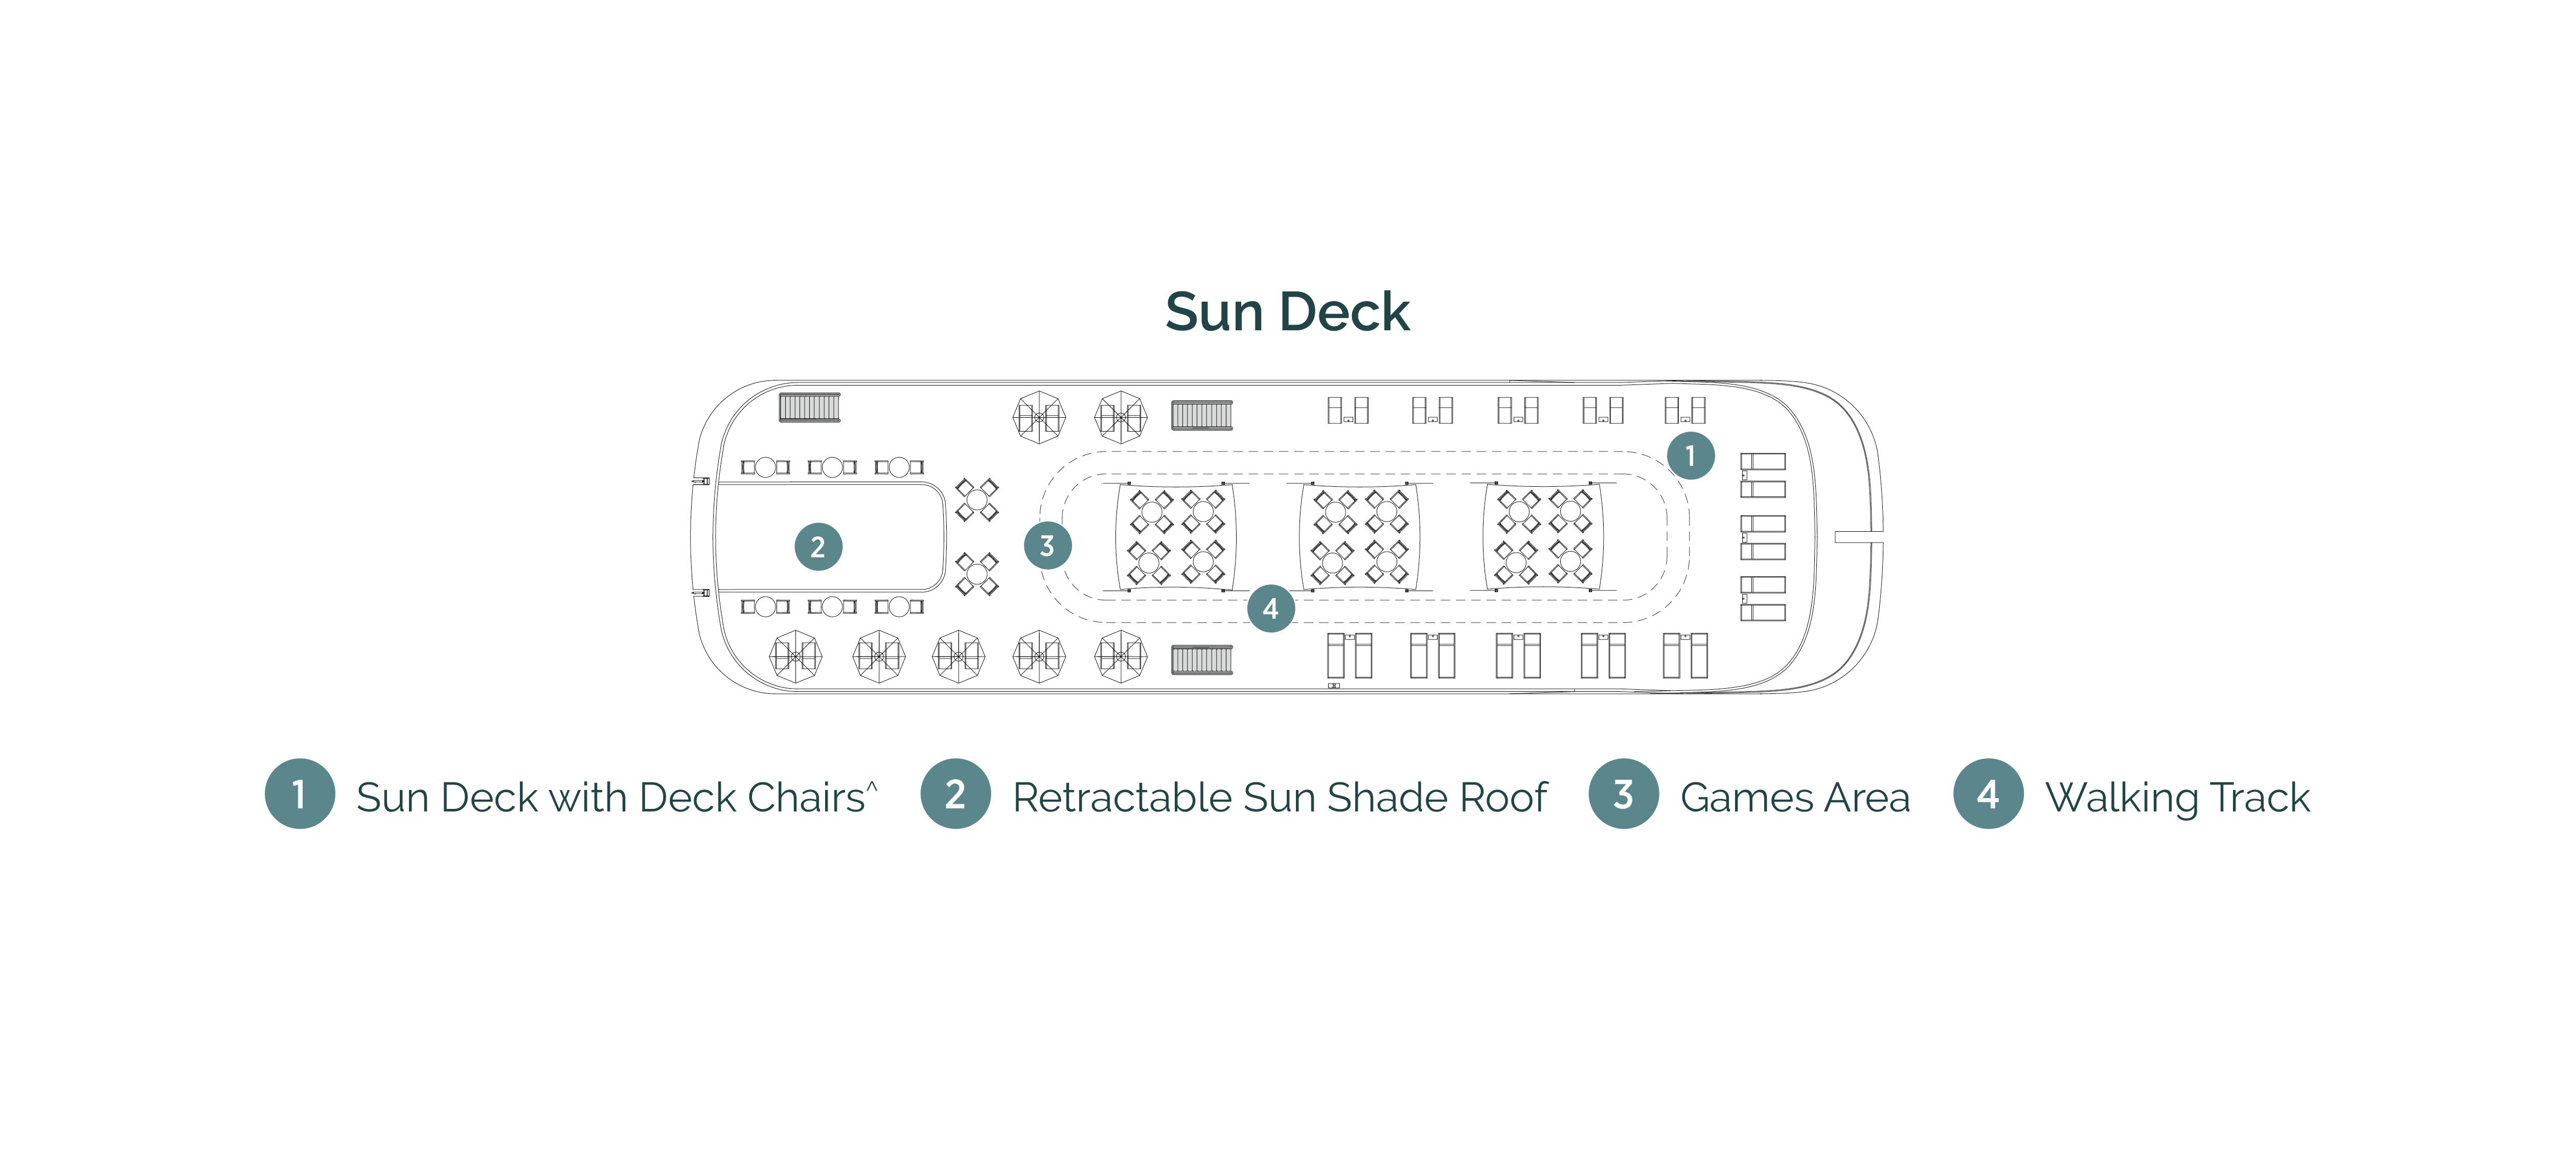 Diagram of ship layout for the Sun Deck of Emerald Cruises’ Mekong river cruising Star-Ship, Emerald Harmony